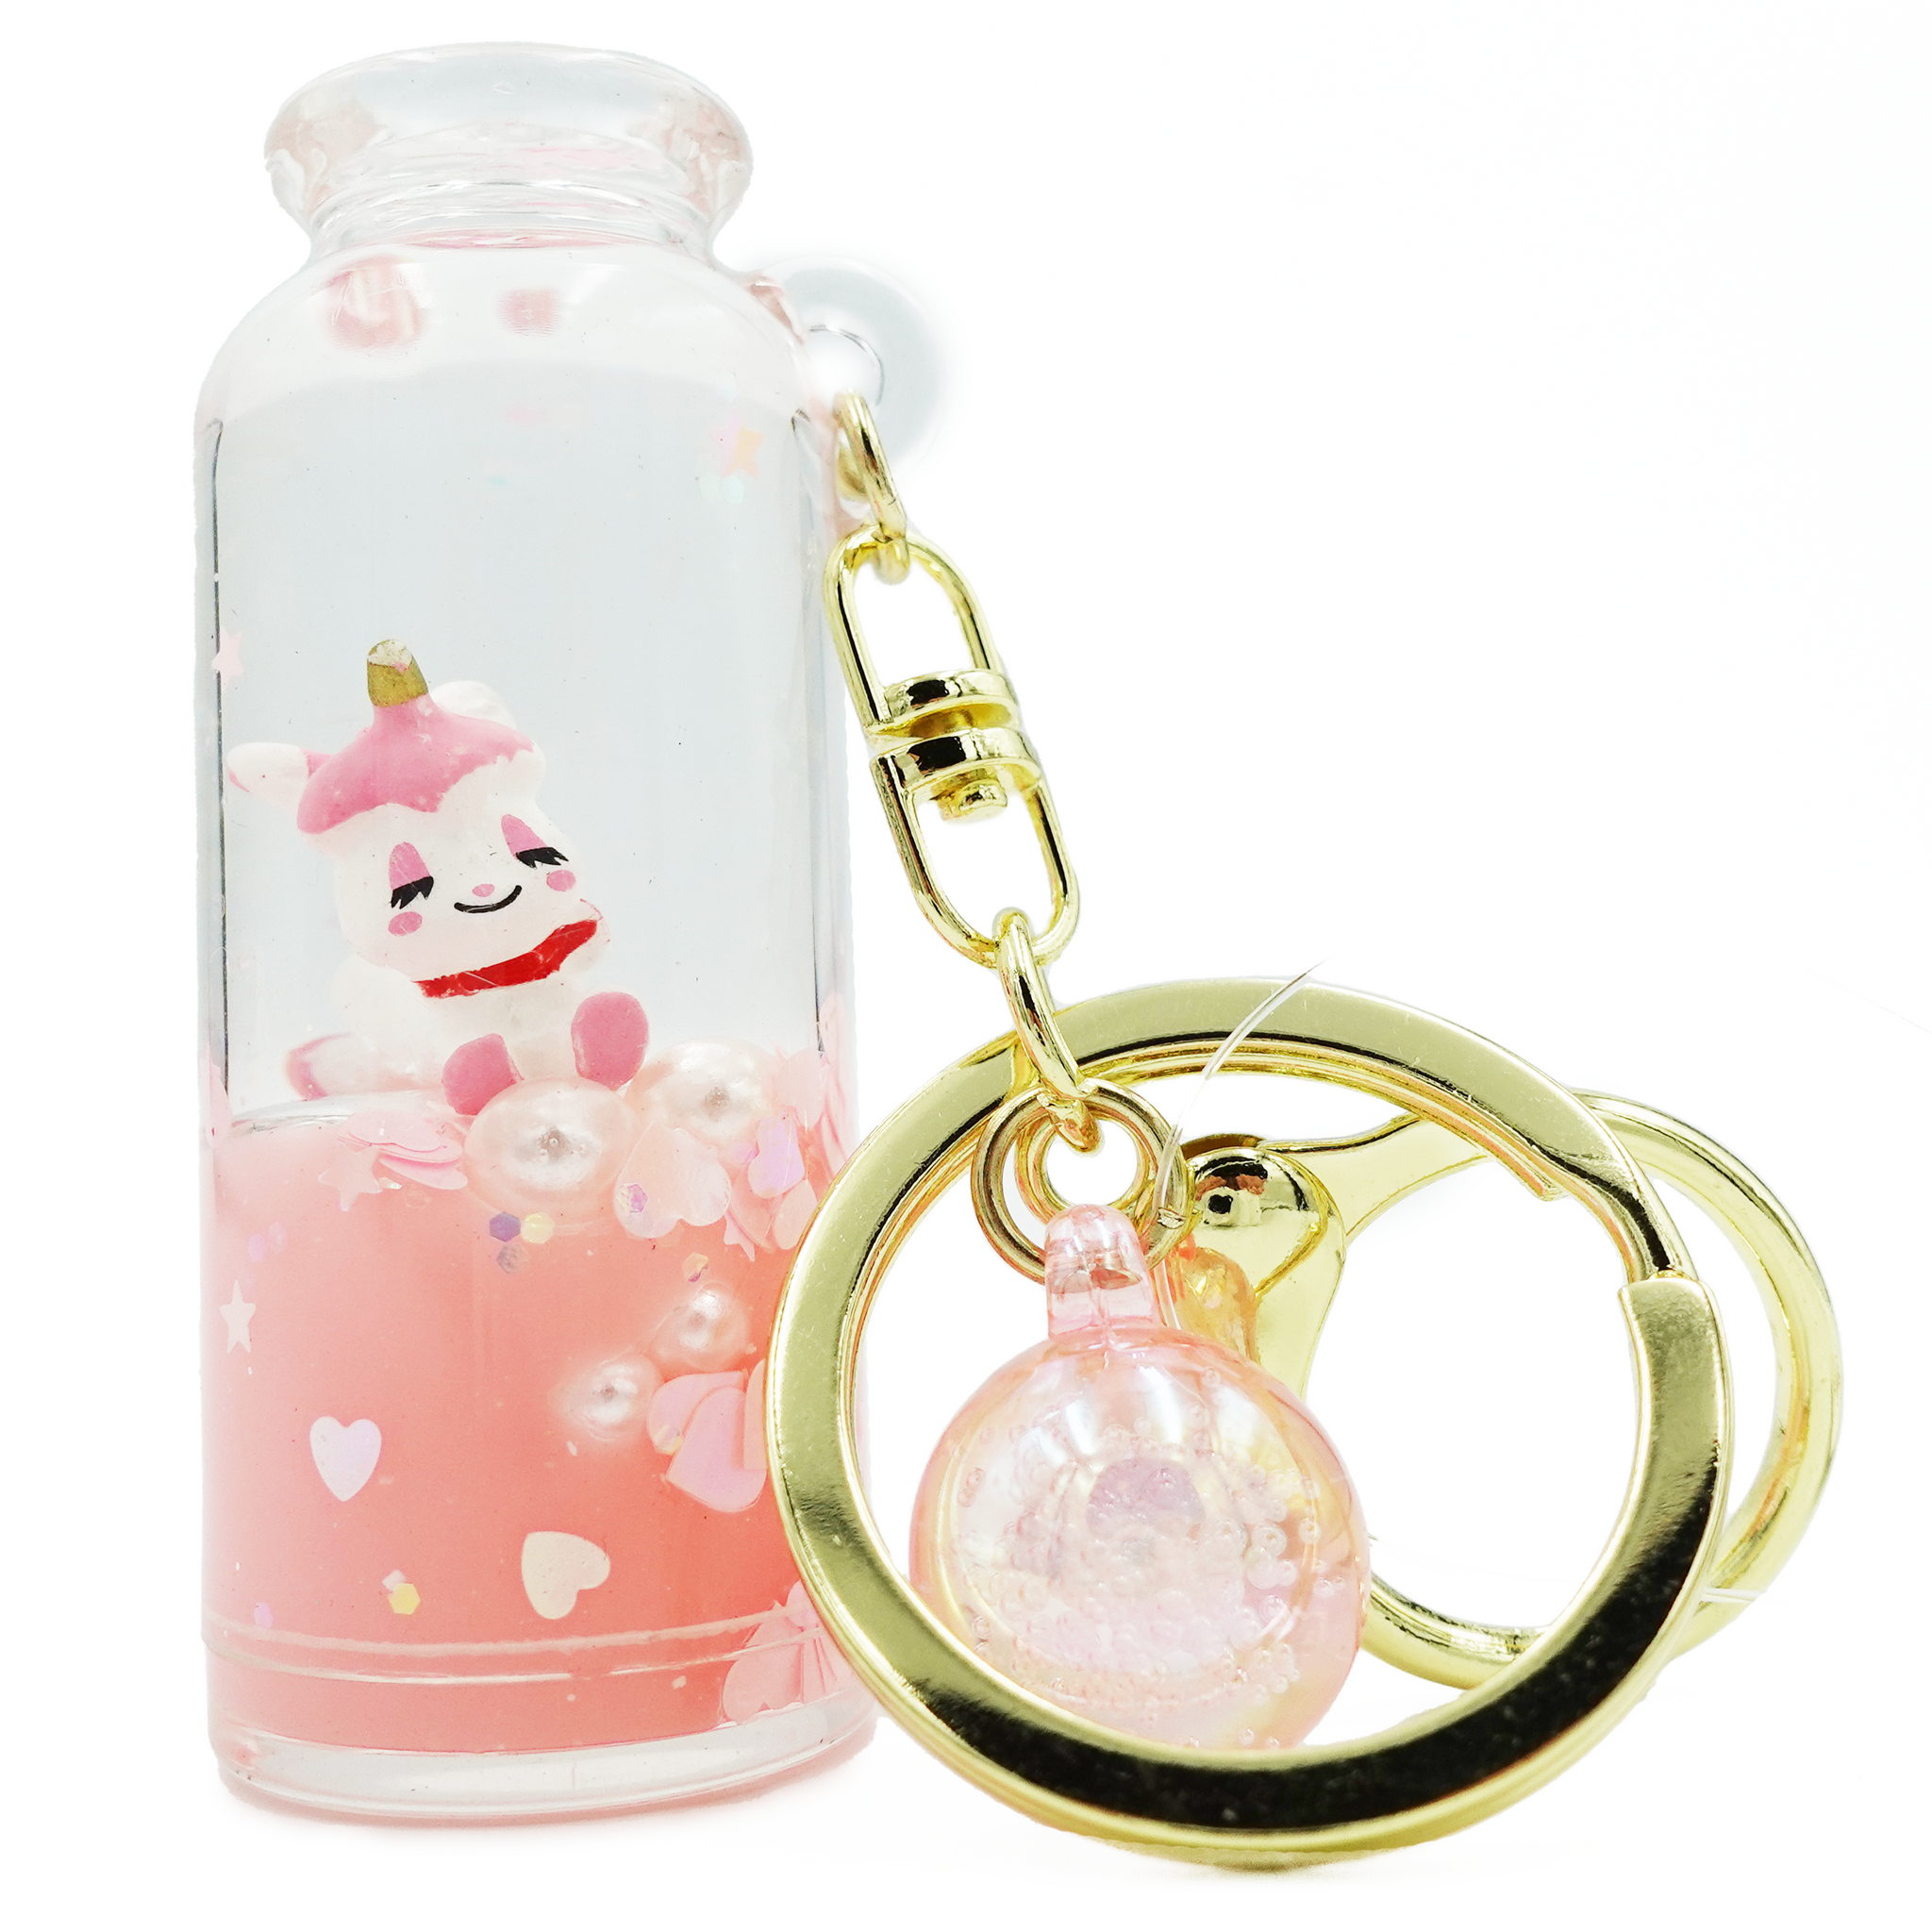 Miniature Unicorn Bottle Keychain / Key Ring Accessories for Luggage, Car keys, Handbags, Wallets, Airpods